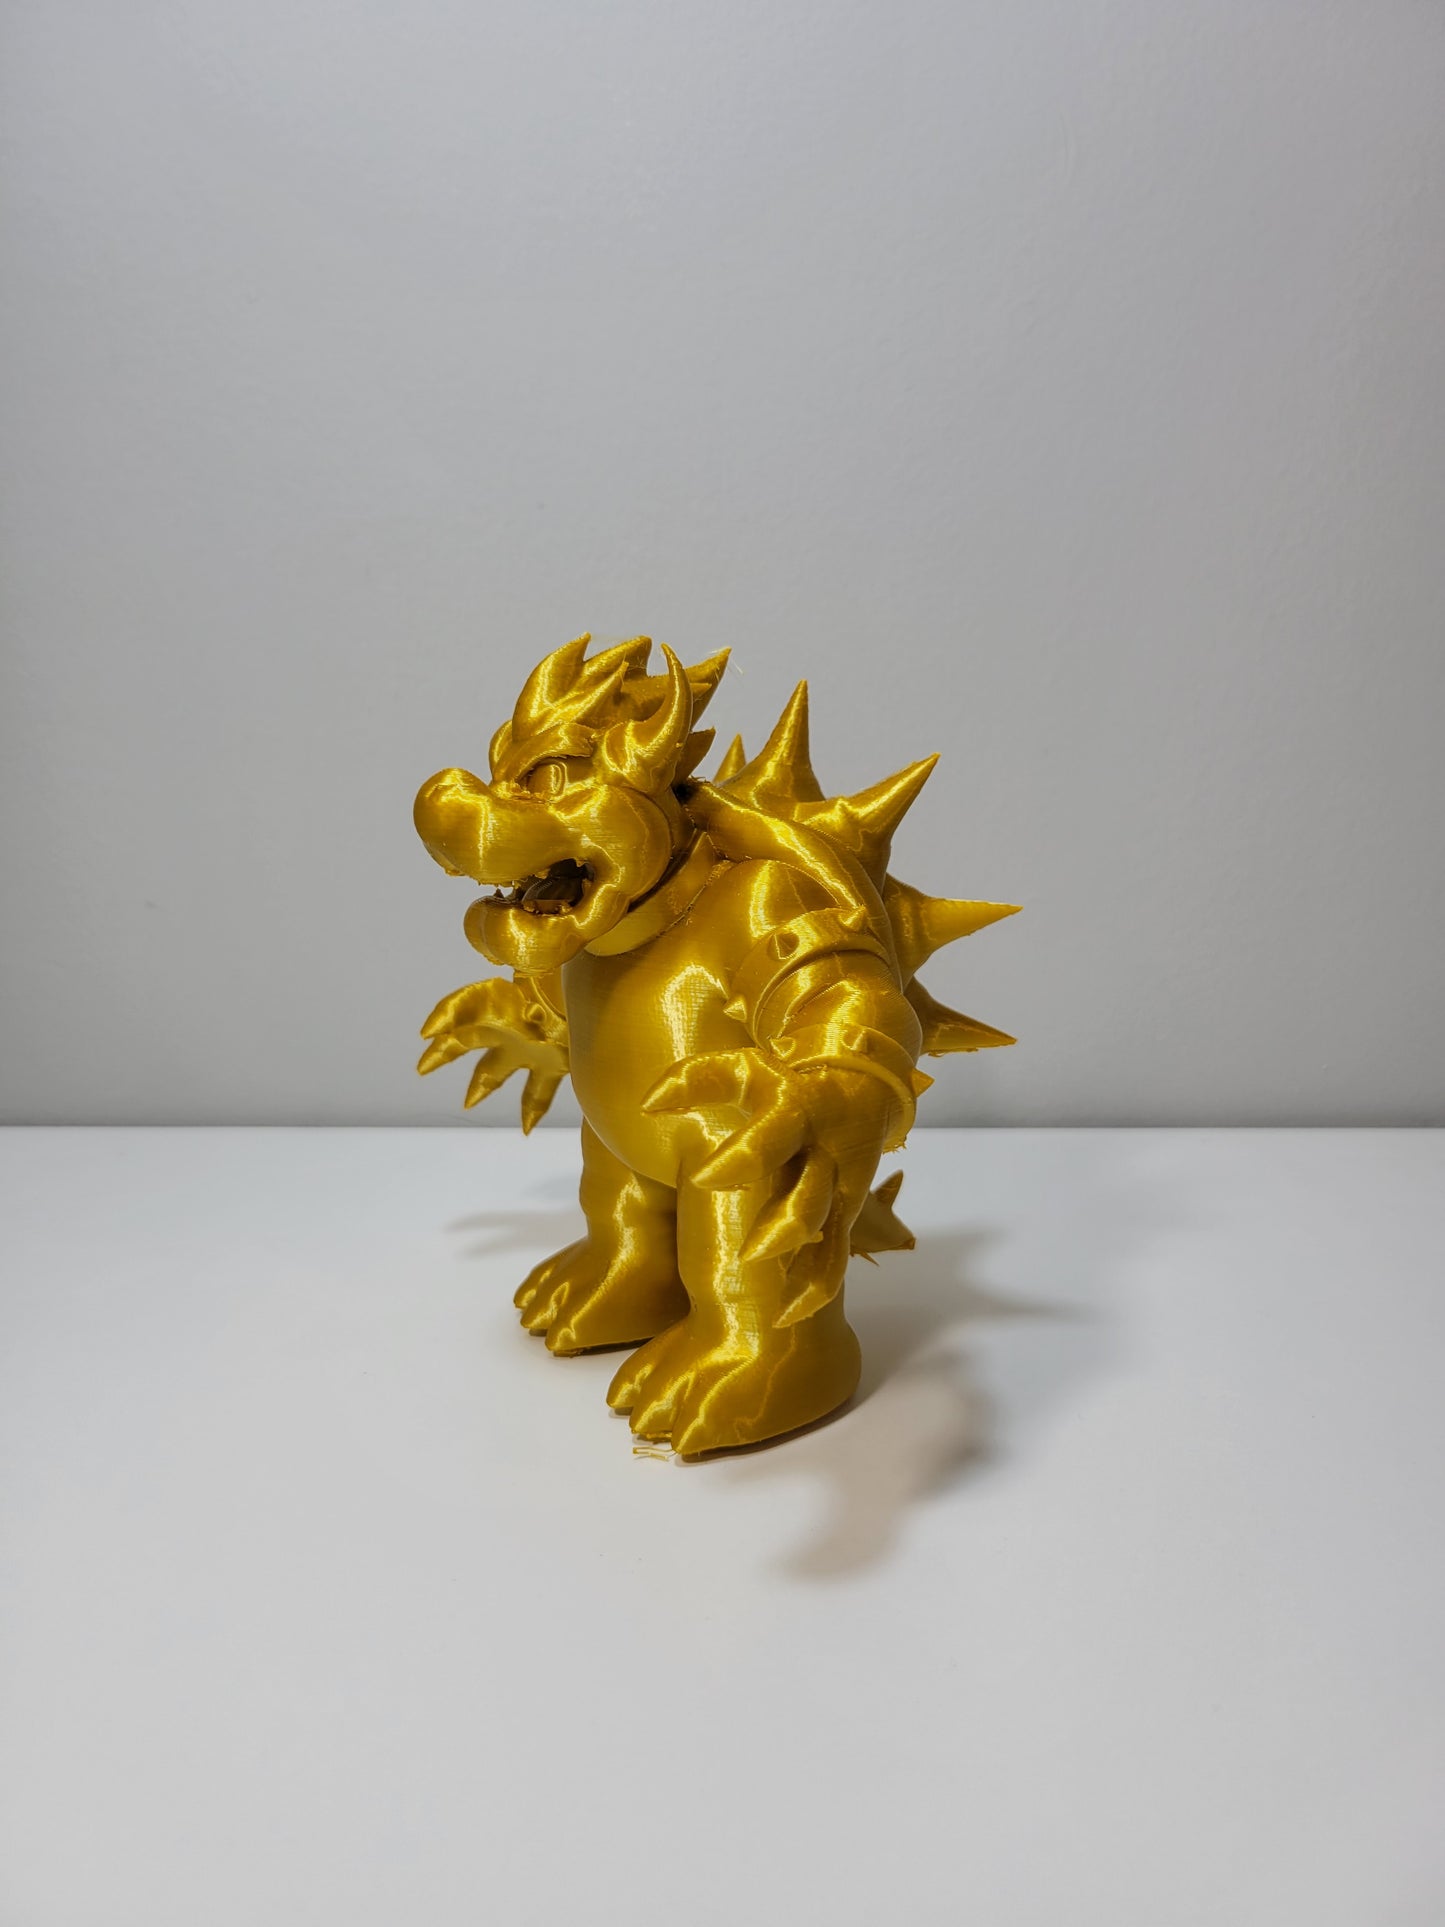 Bowser Super Mario Bros 3D Printed Video Game Movie Fan Gift